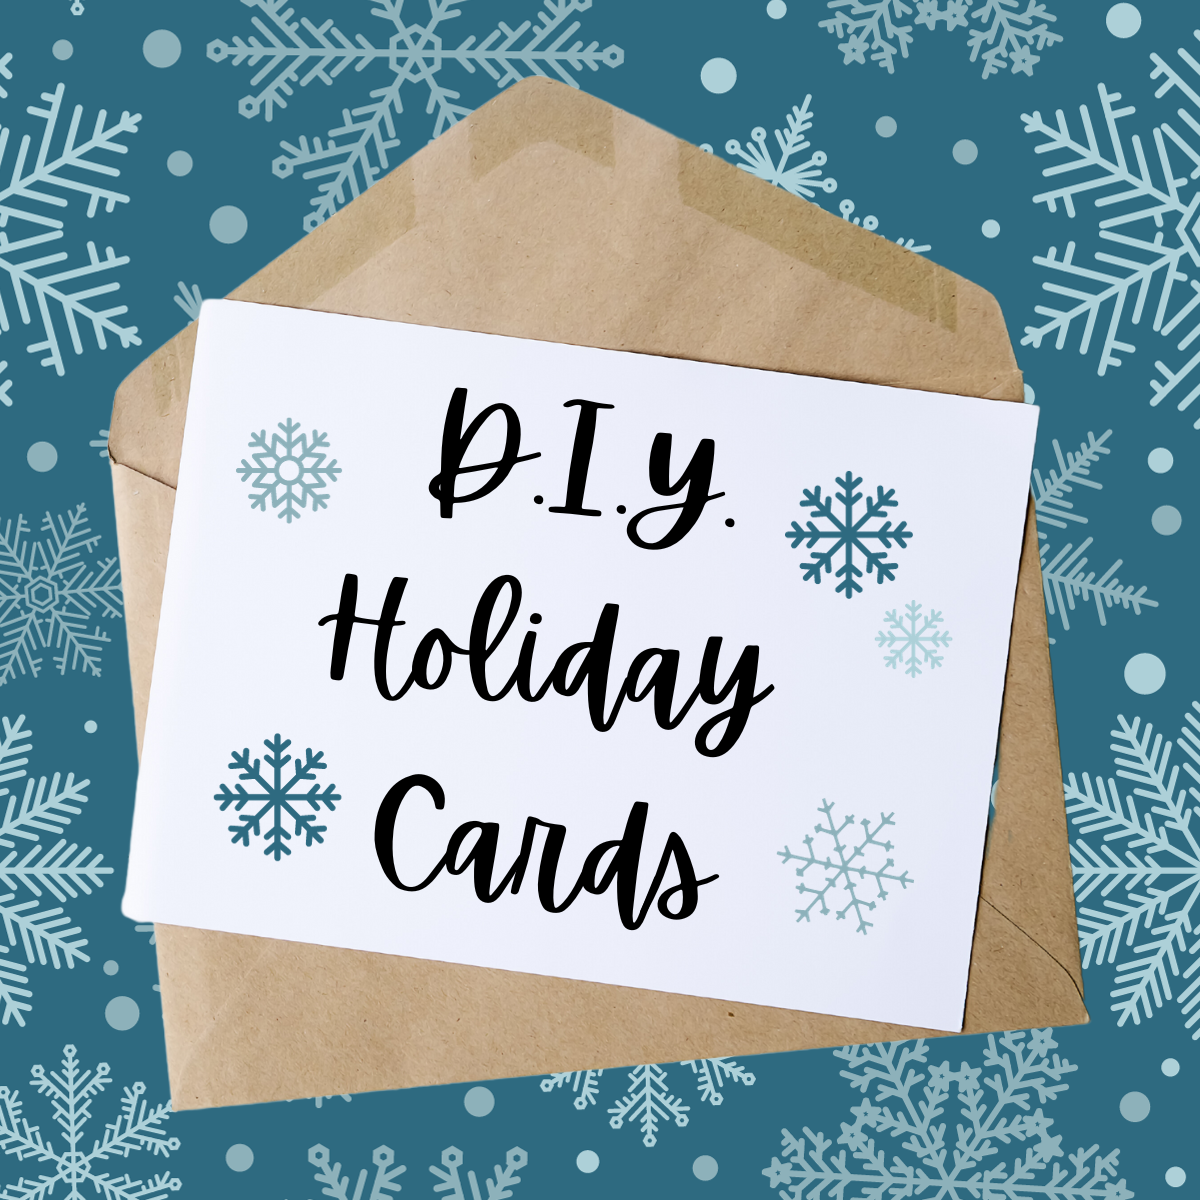 An envelope with a card on top that reads DIY Holiday cards.